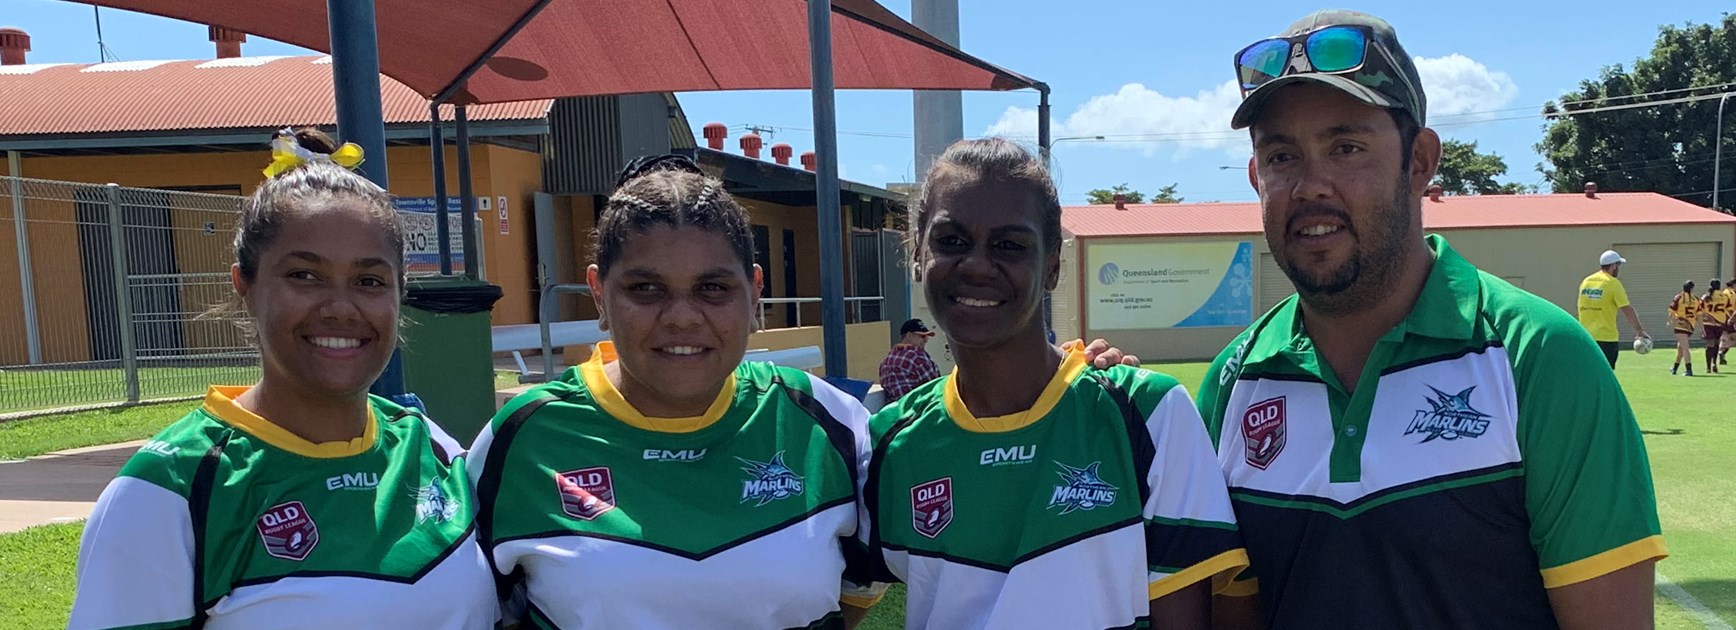 Main Image: Sorren Owens from Mornington Island with the Mornington Island girls and Jordan Marshall from Burketown who played in the Northern Outback women's team
